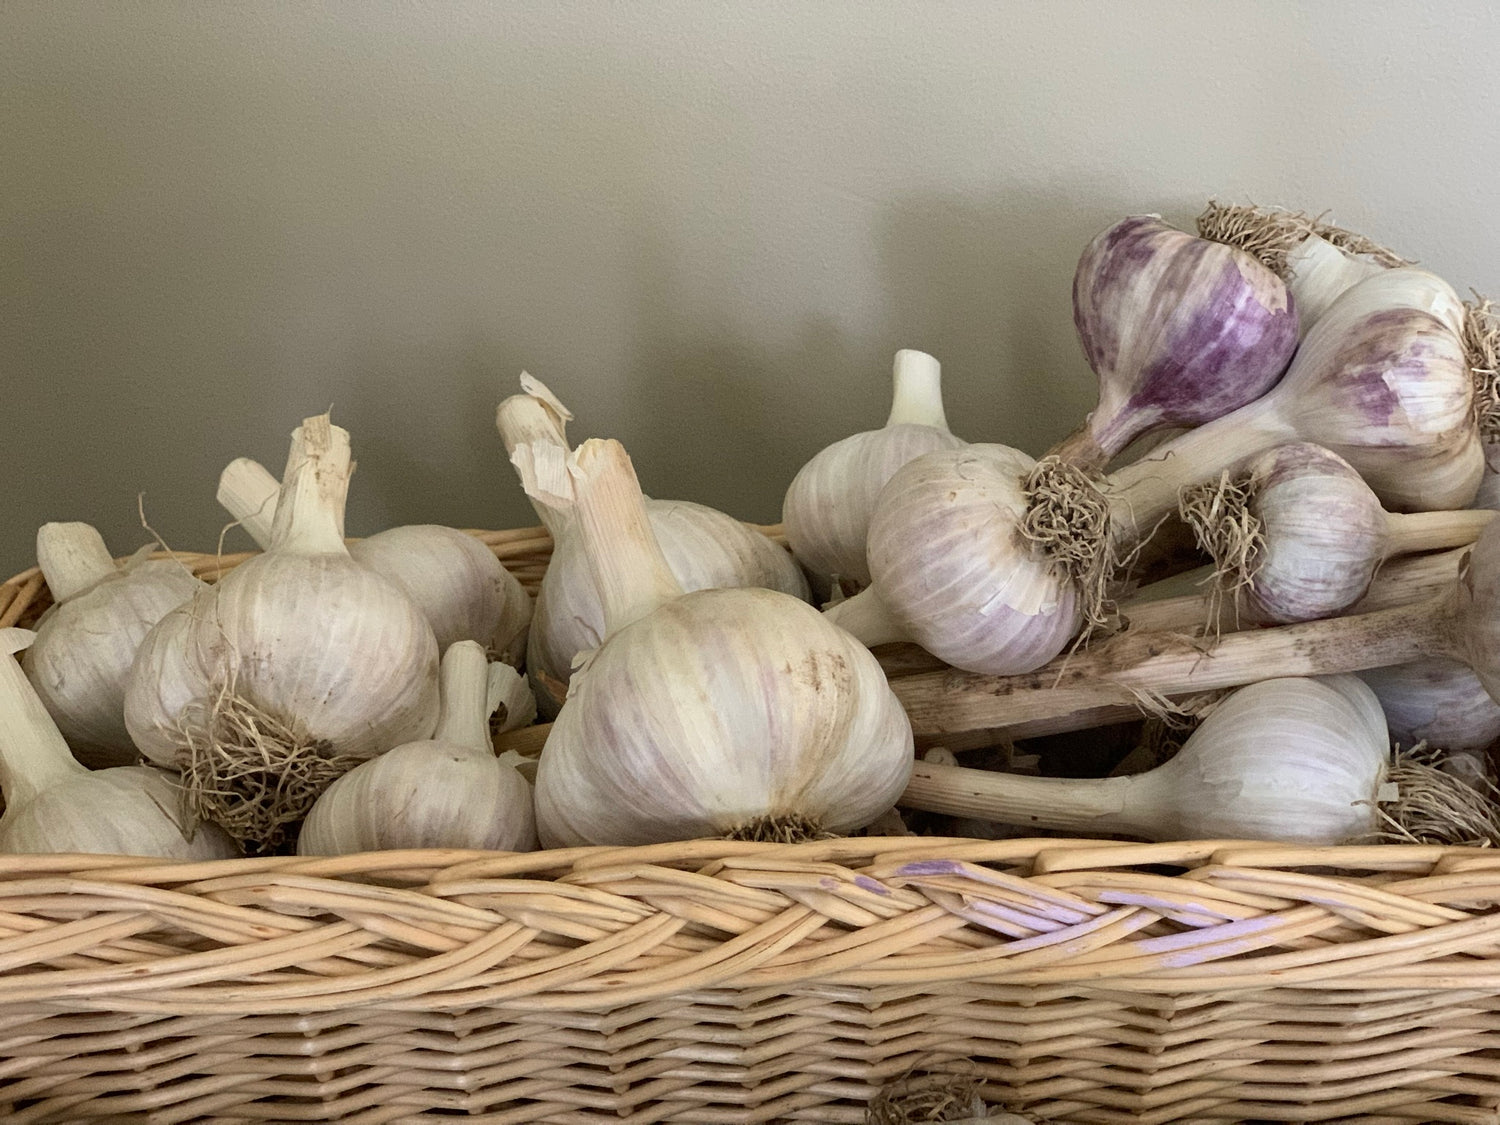 Purple Porcelain Music Garlic overflowing in a basket.  This Music garlic is planted and  harvested by hand to give you the best quality garlic for cooking roasting eating and is a wonderful source for seed garlic.